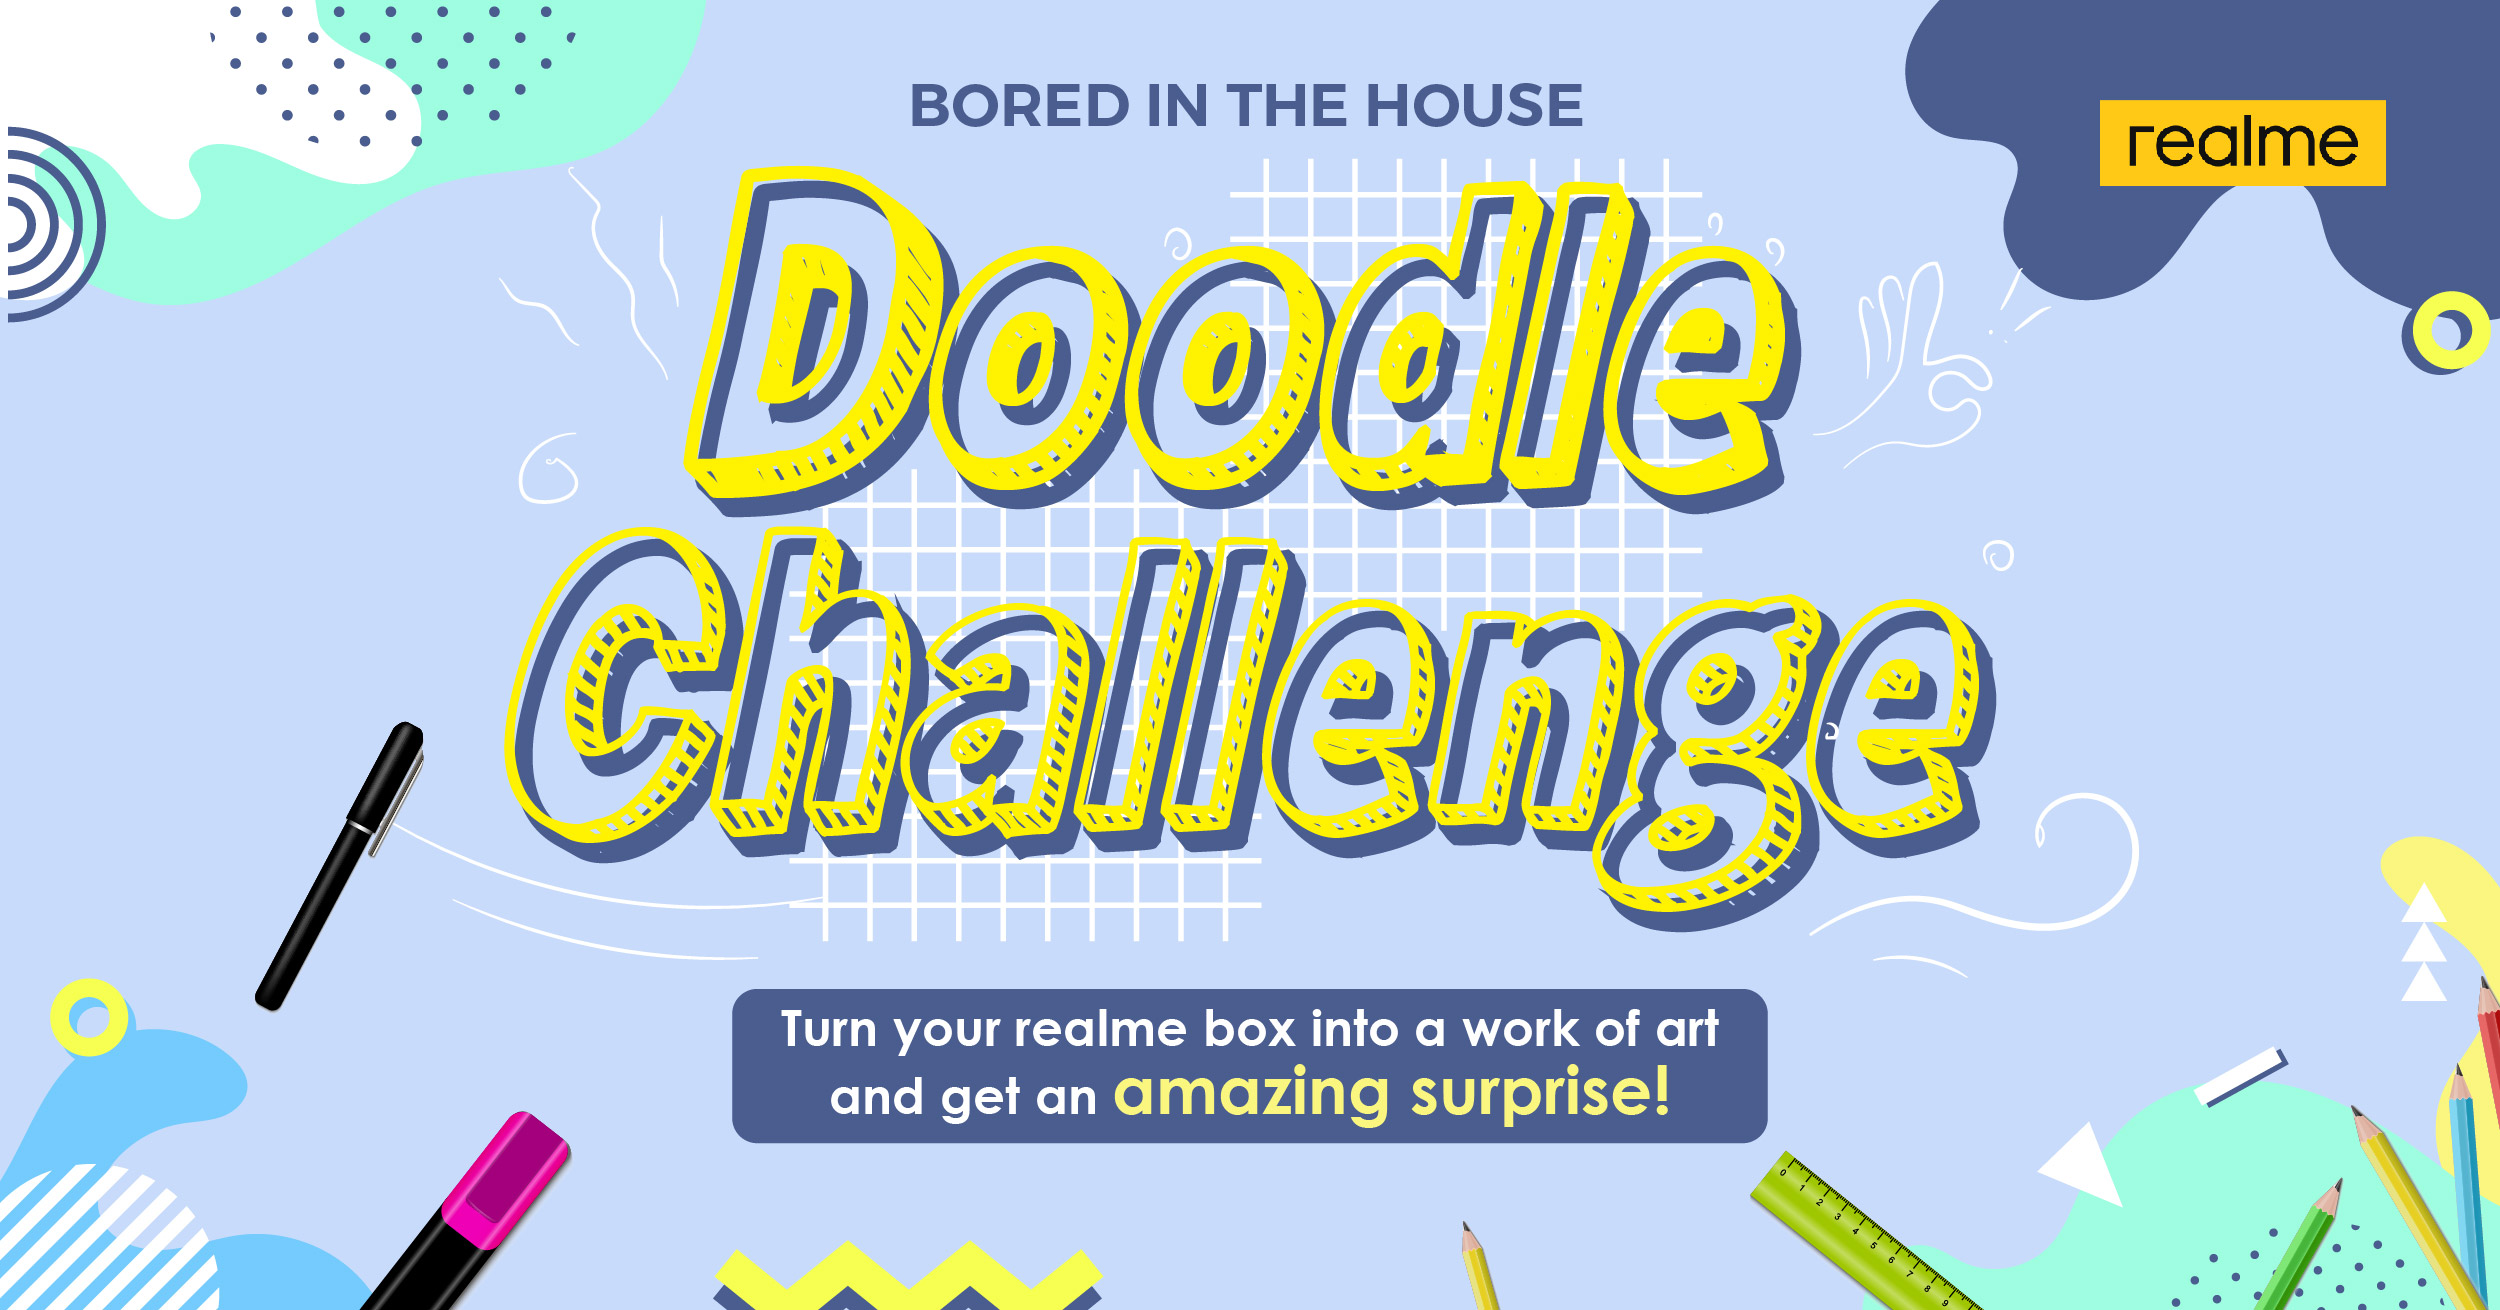 realme Philippines invites fans to join #realmeDoodleChallenge!